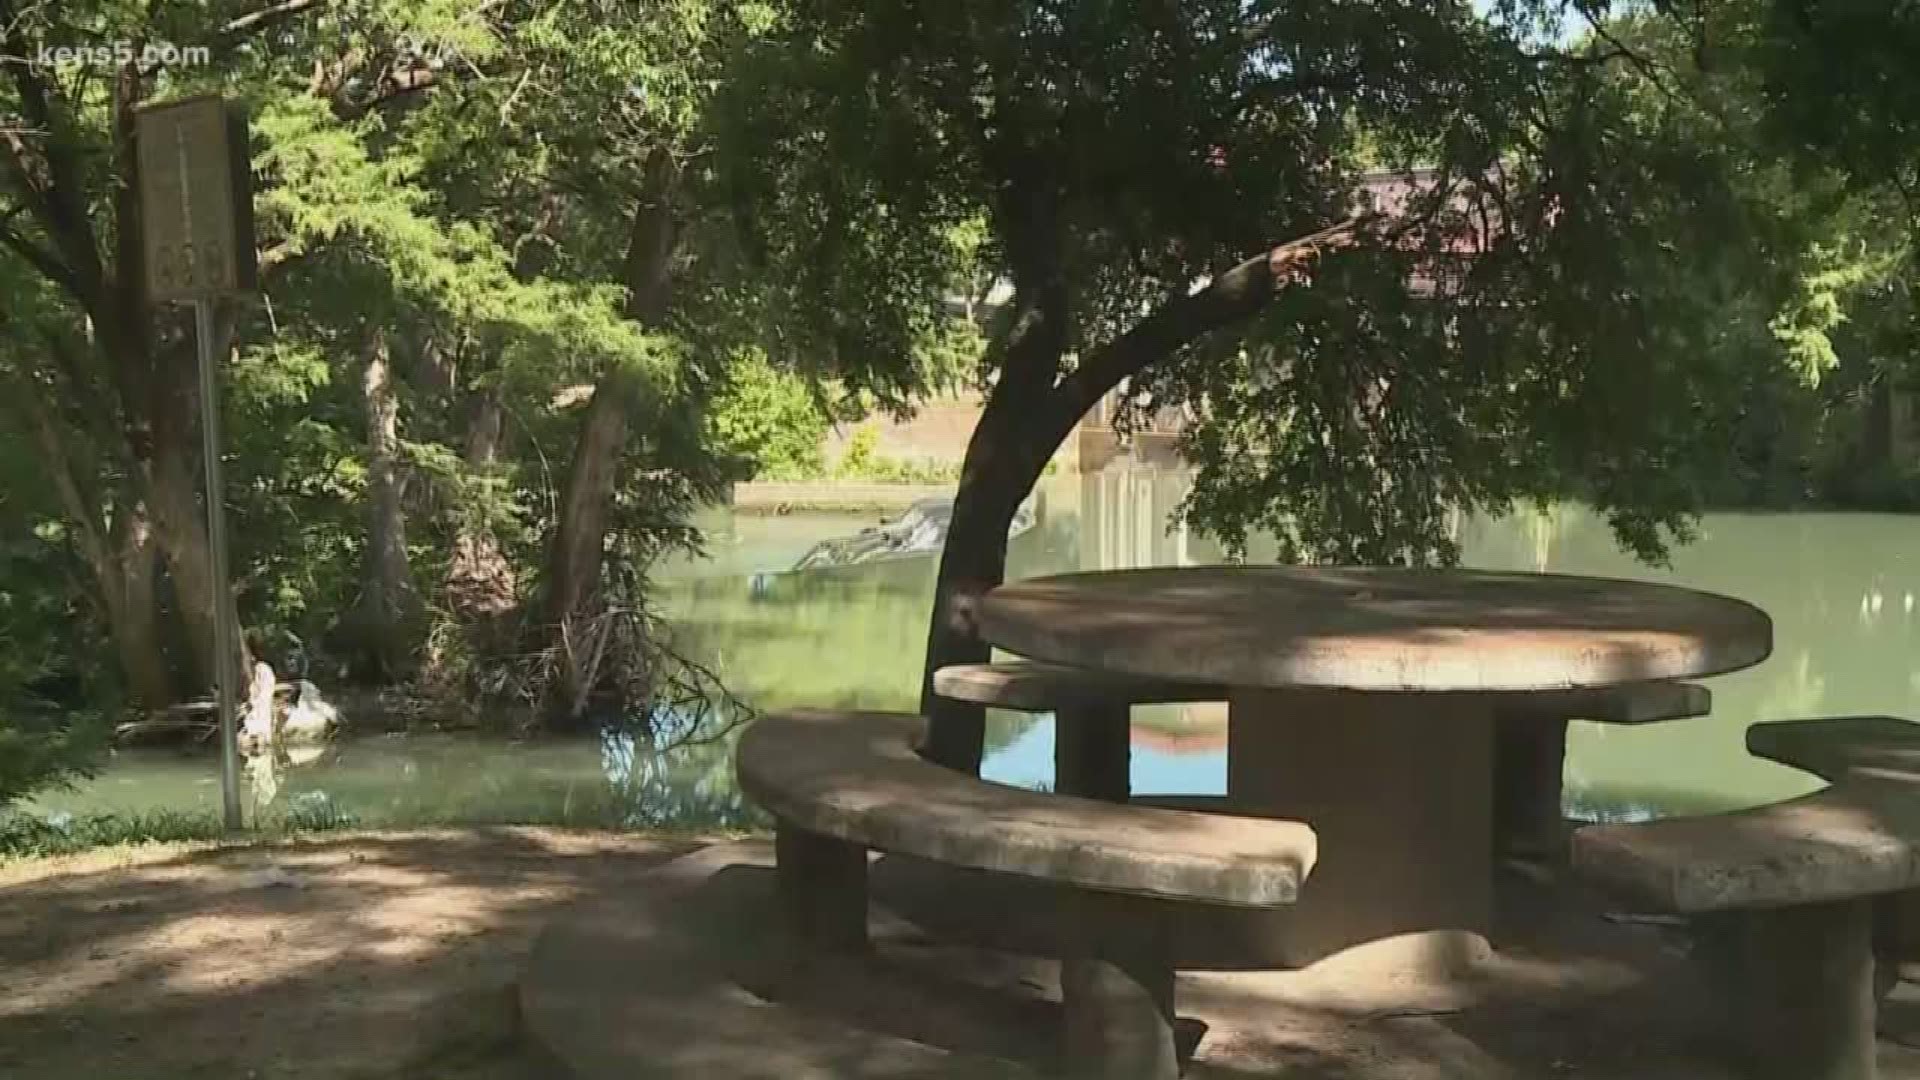 Seguin Police have identified the man whose body was found in the Guadalupe River near the south side of Starcke Park on Tuesday afternoon.